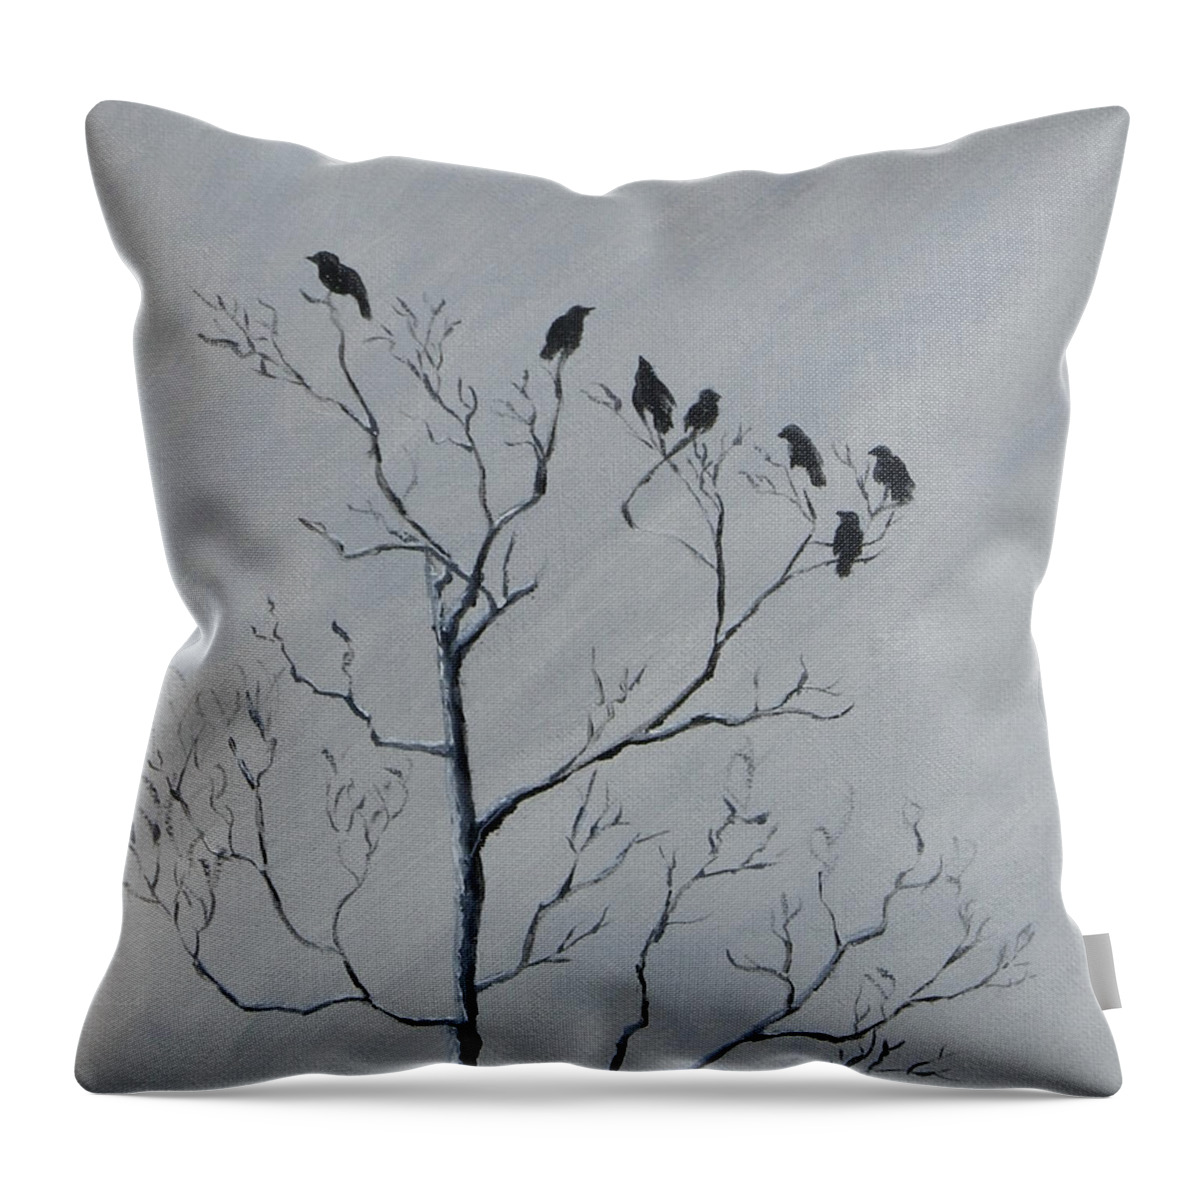 Birds Throw Pillow featuring the painting Waiting For The Sun by Jackie Irwin